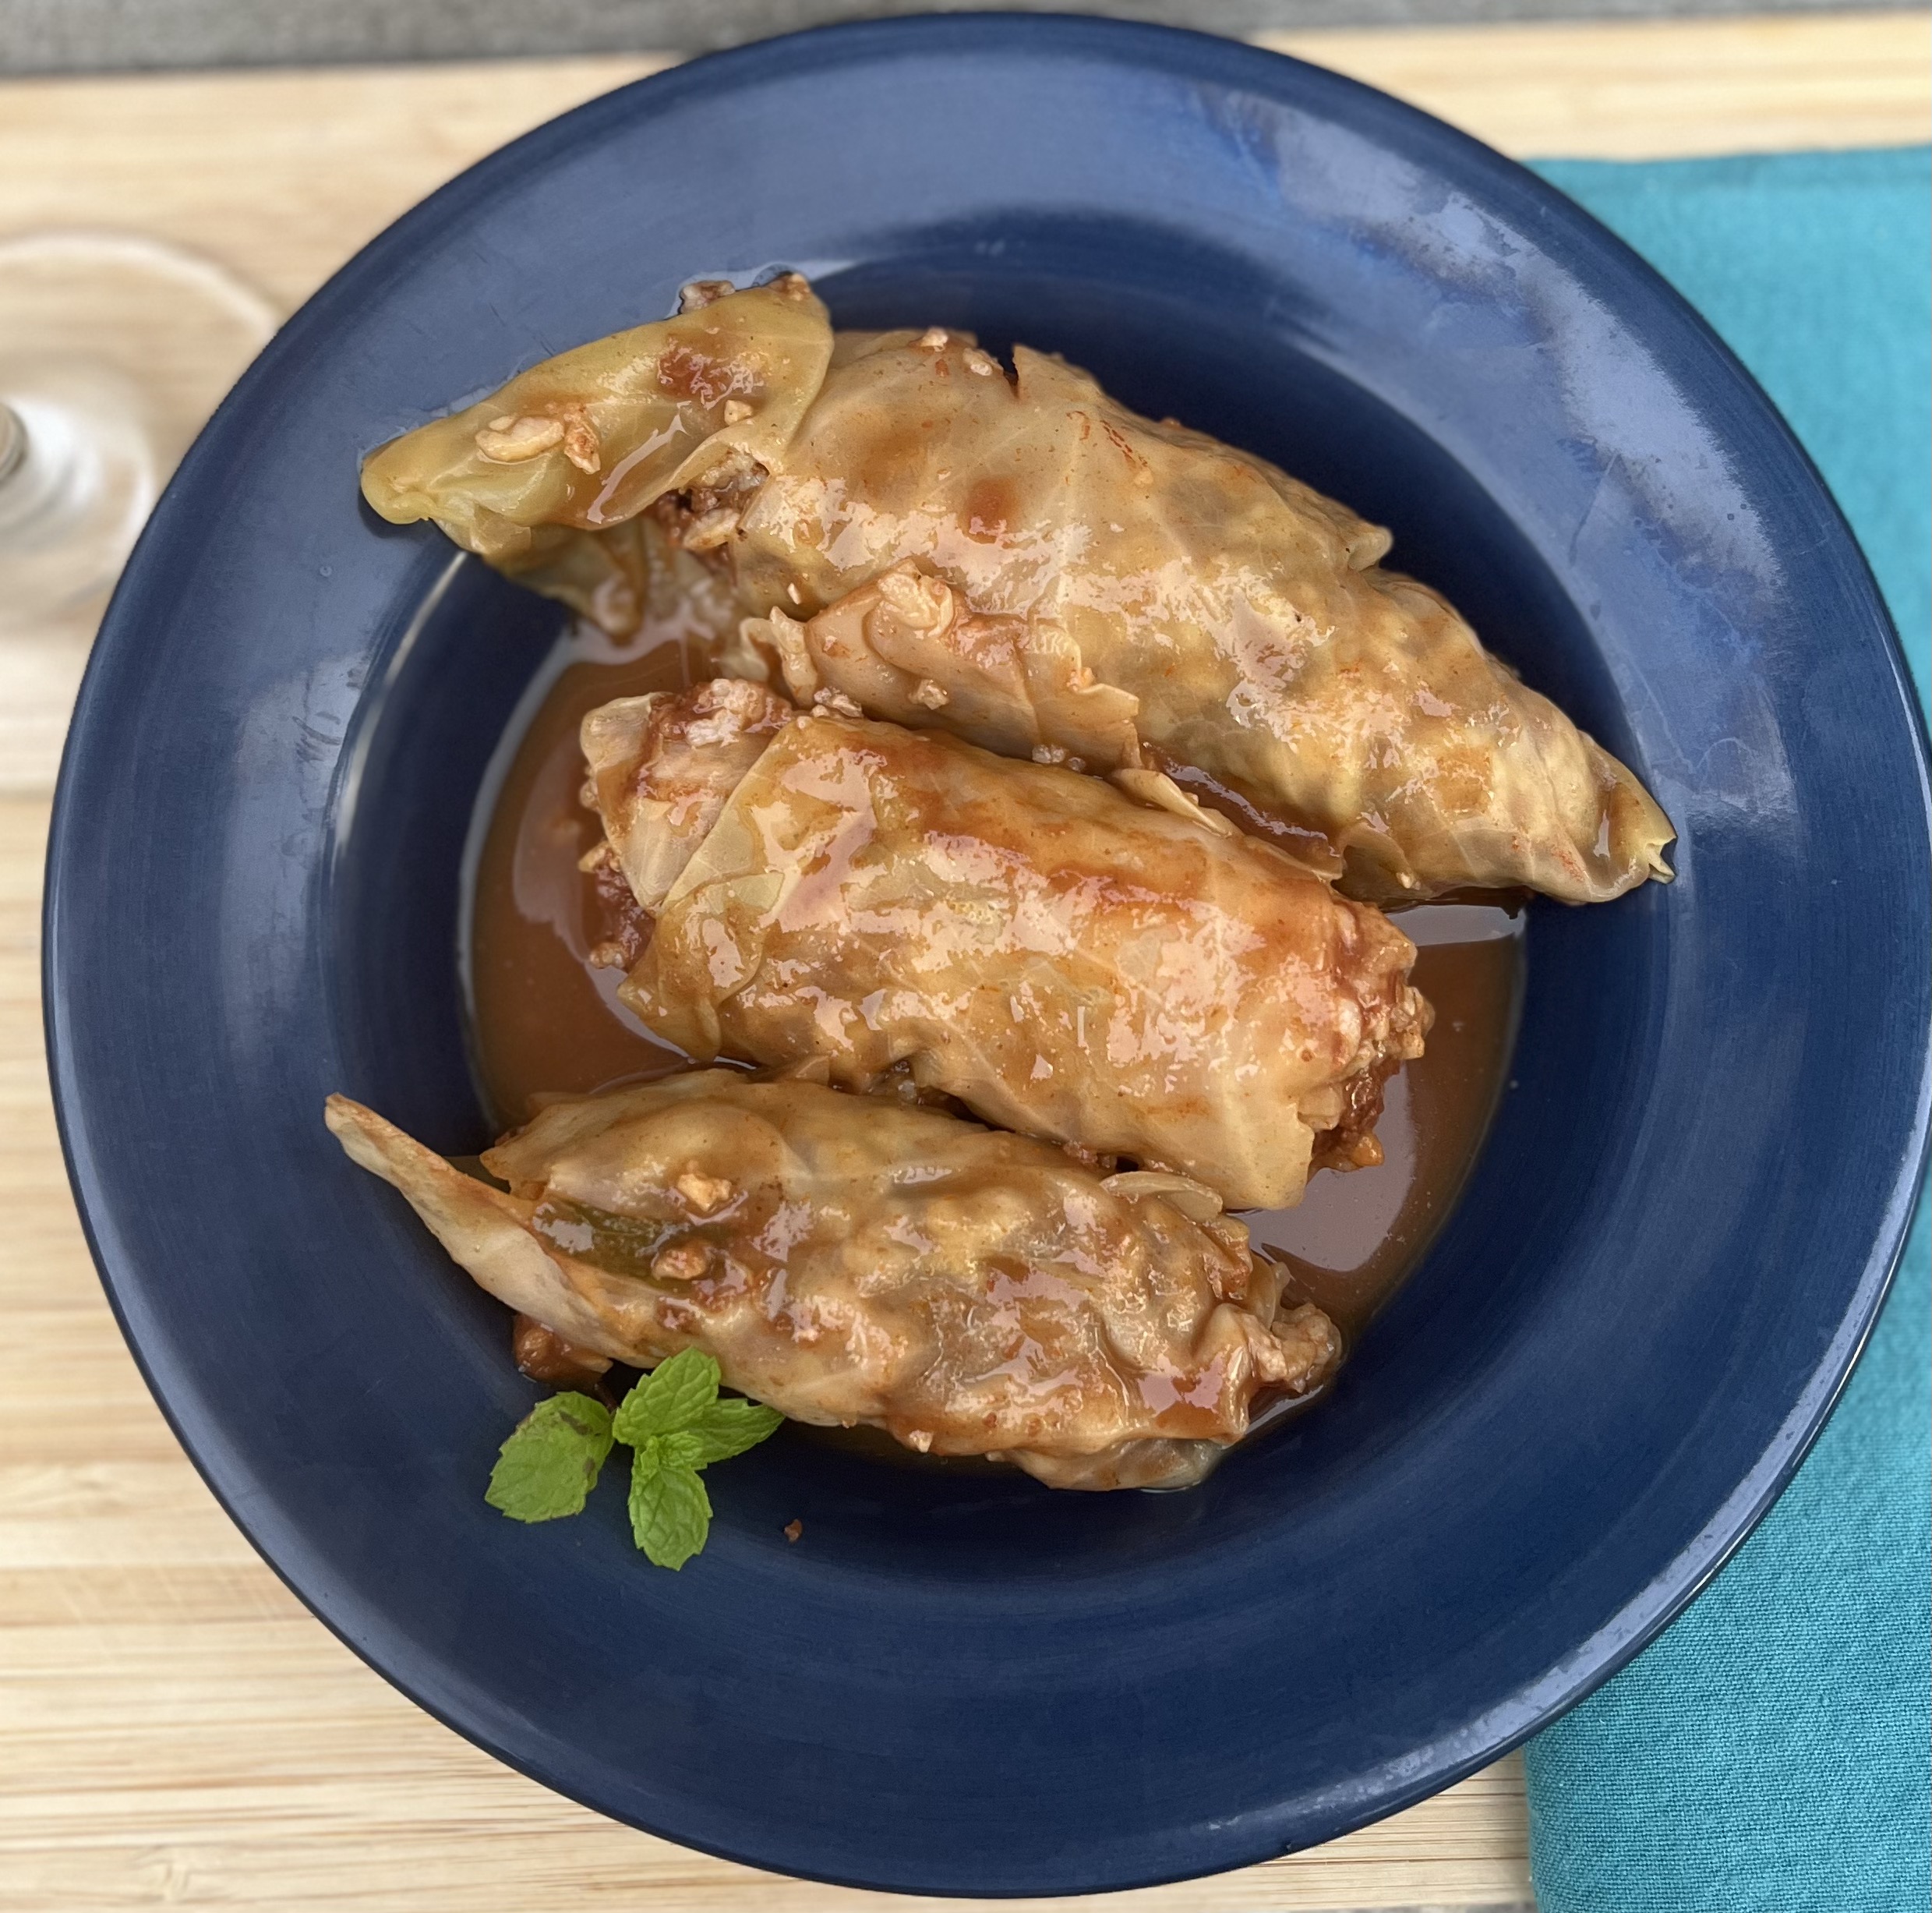 Lahana (Syrian Meat and Rice Stuffed Cabbage) - Simply Scrumptious by Sarah